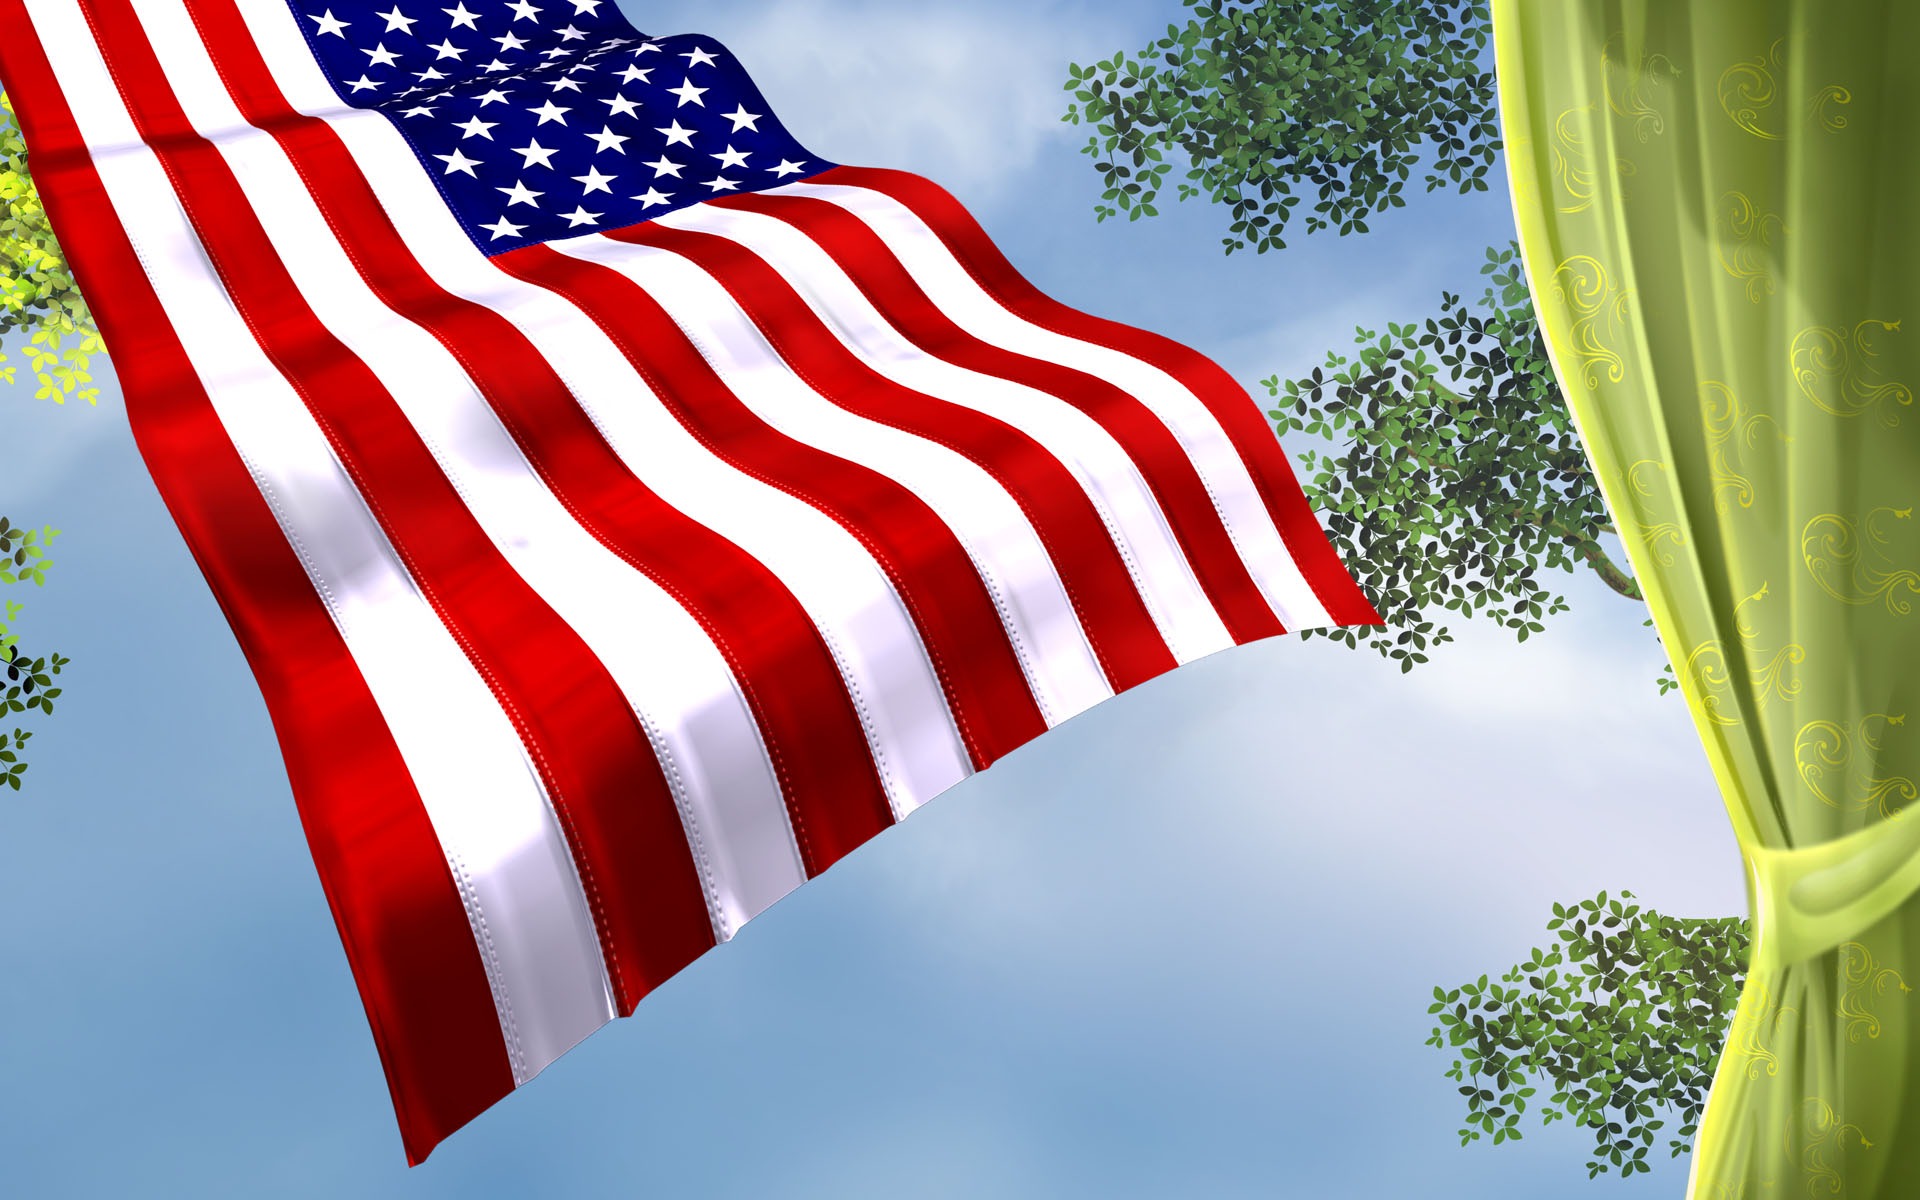 U.S. Independence Day theme wallpaper #33 - 1920x1200